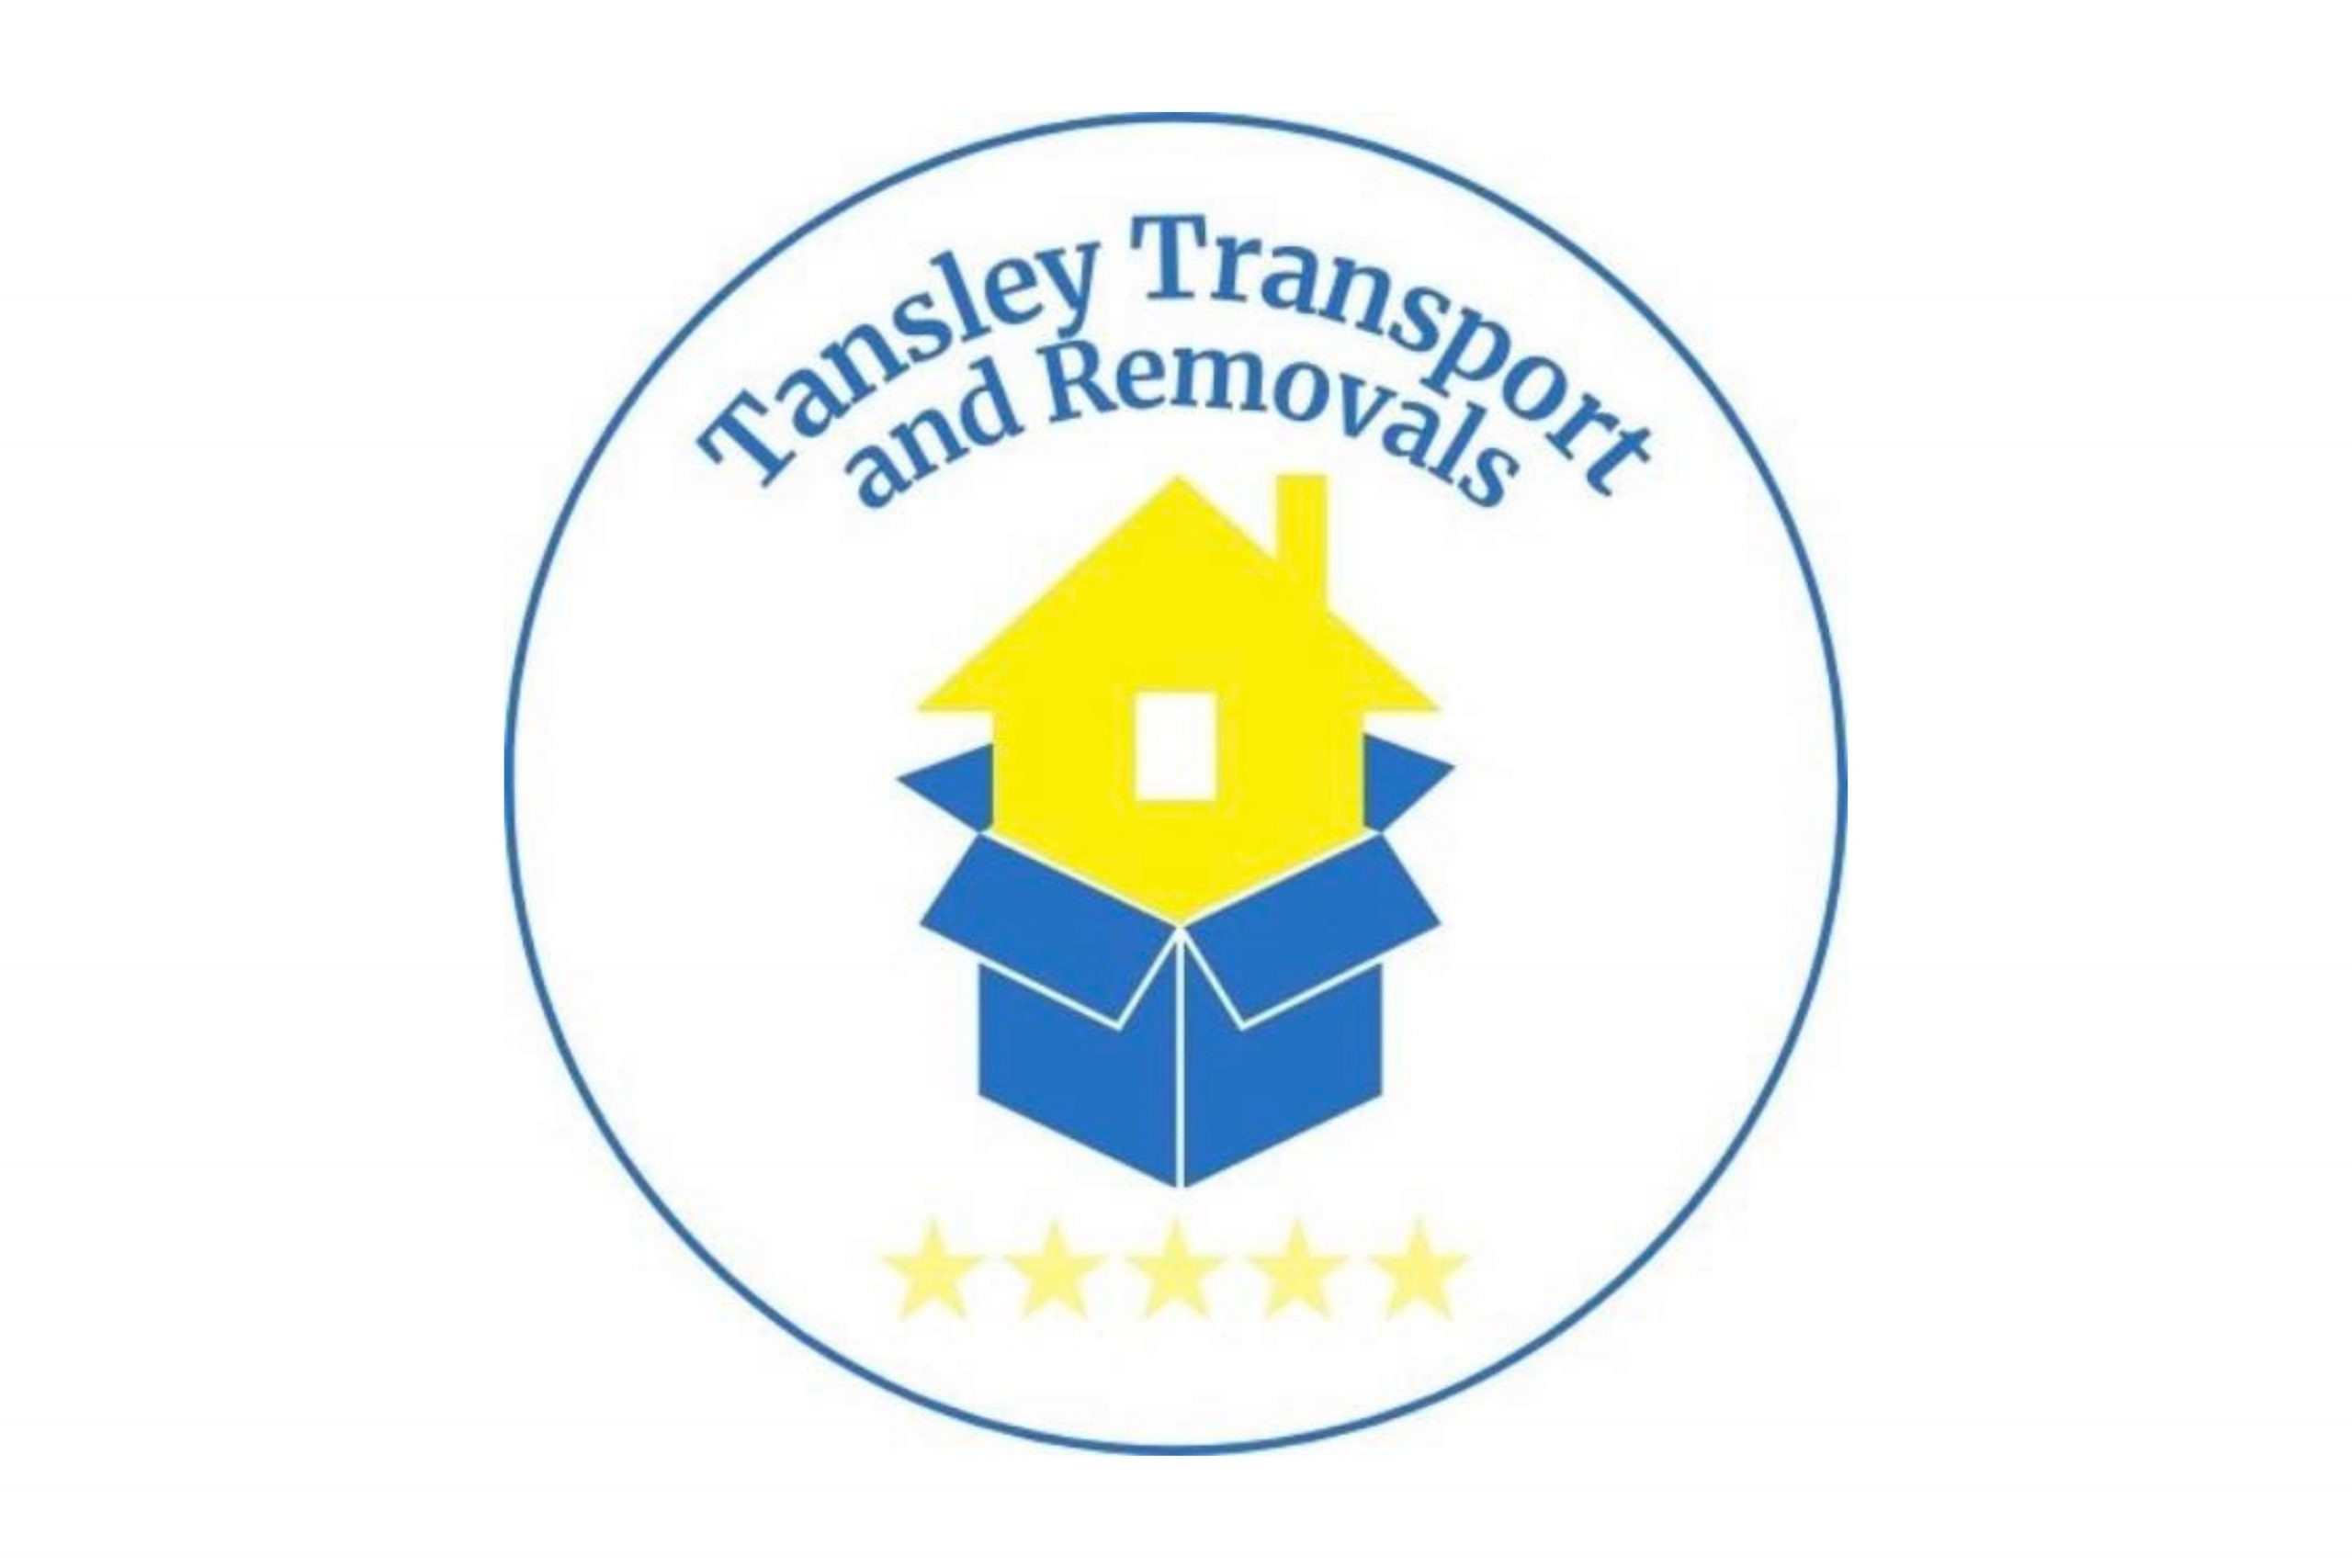 Tansley Transport and Removals